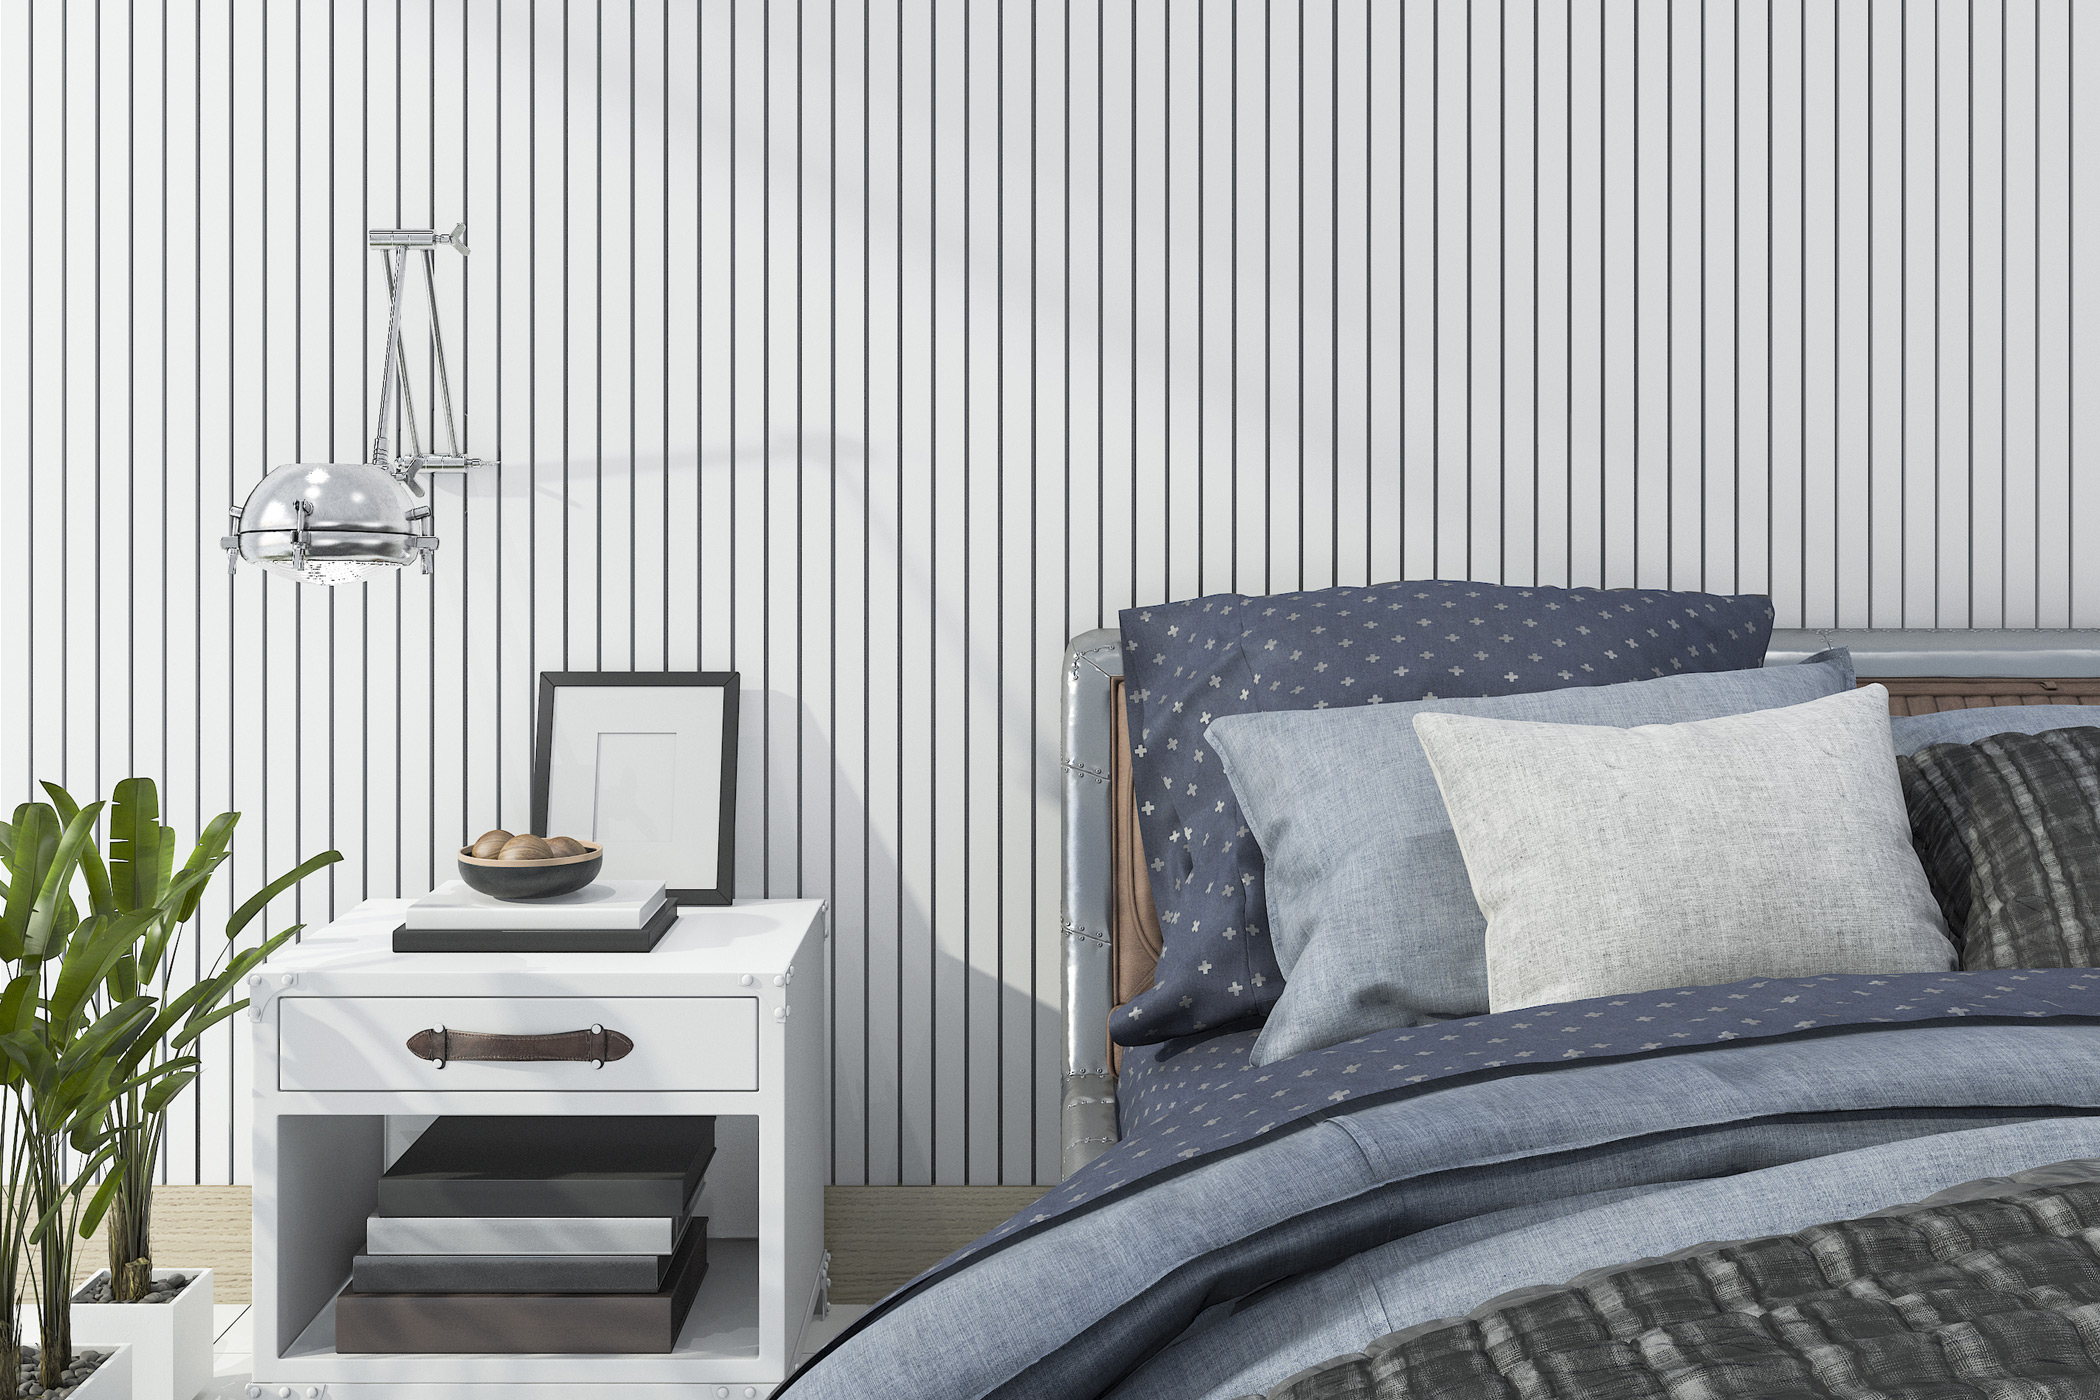 a bed and side table decorated neatly in front of the bold vertical striped wallpaper